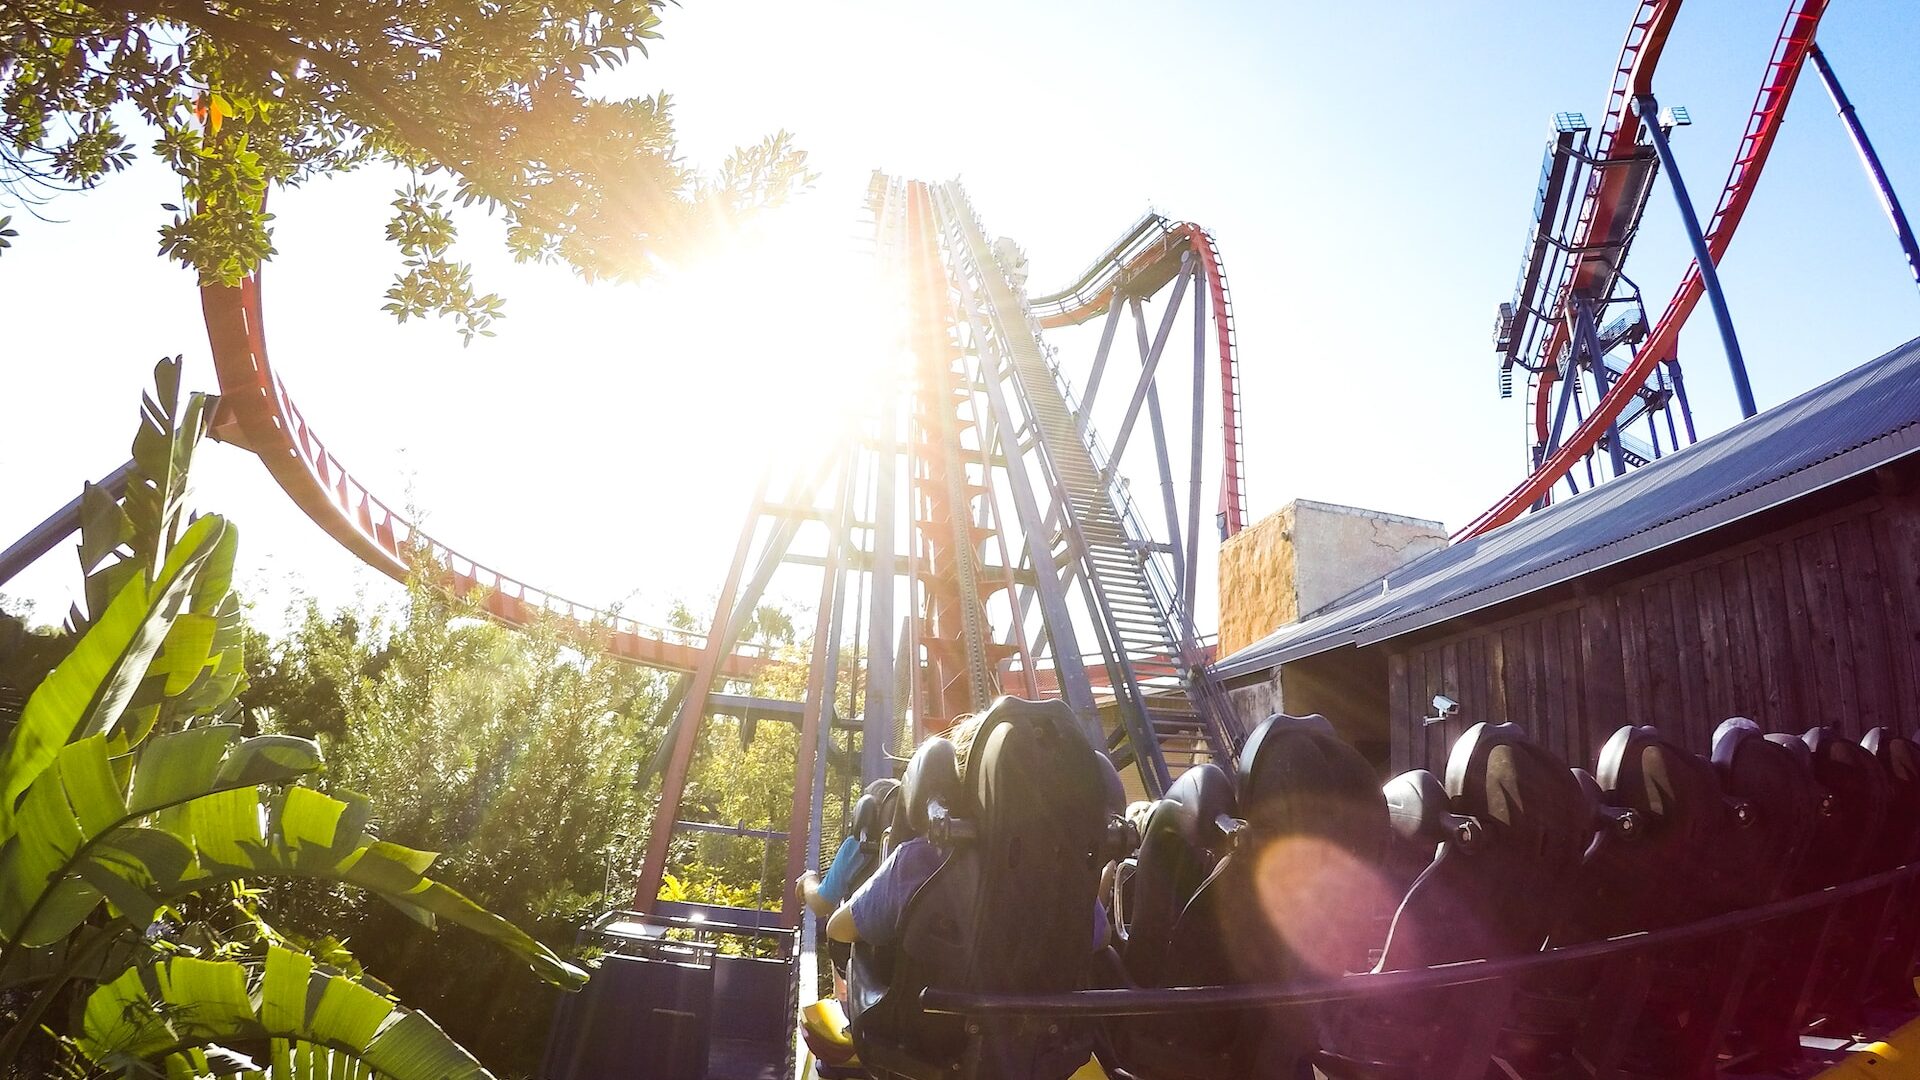 things to do in tampa - roller coasters at busch gardens